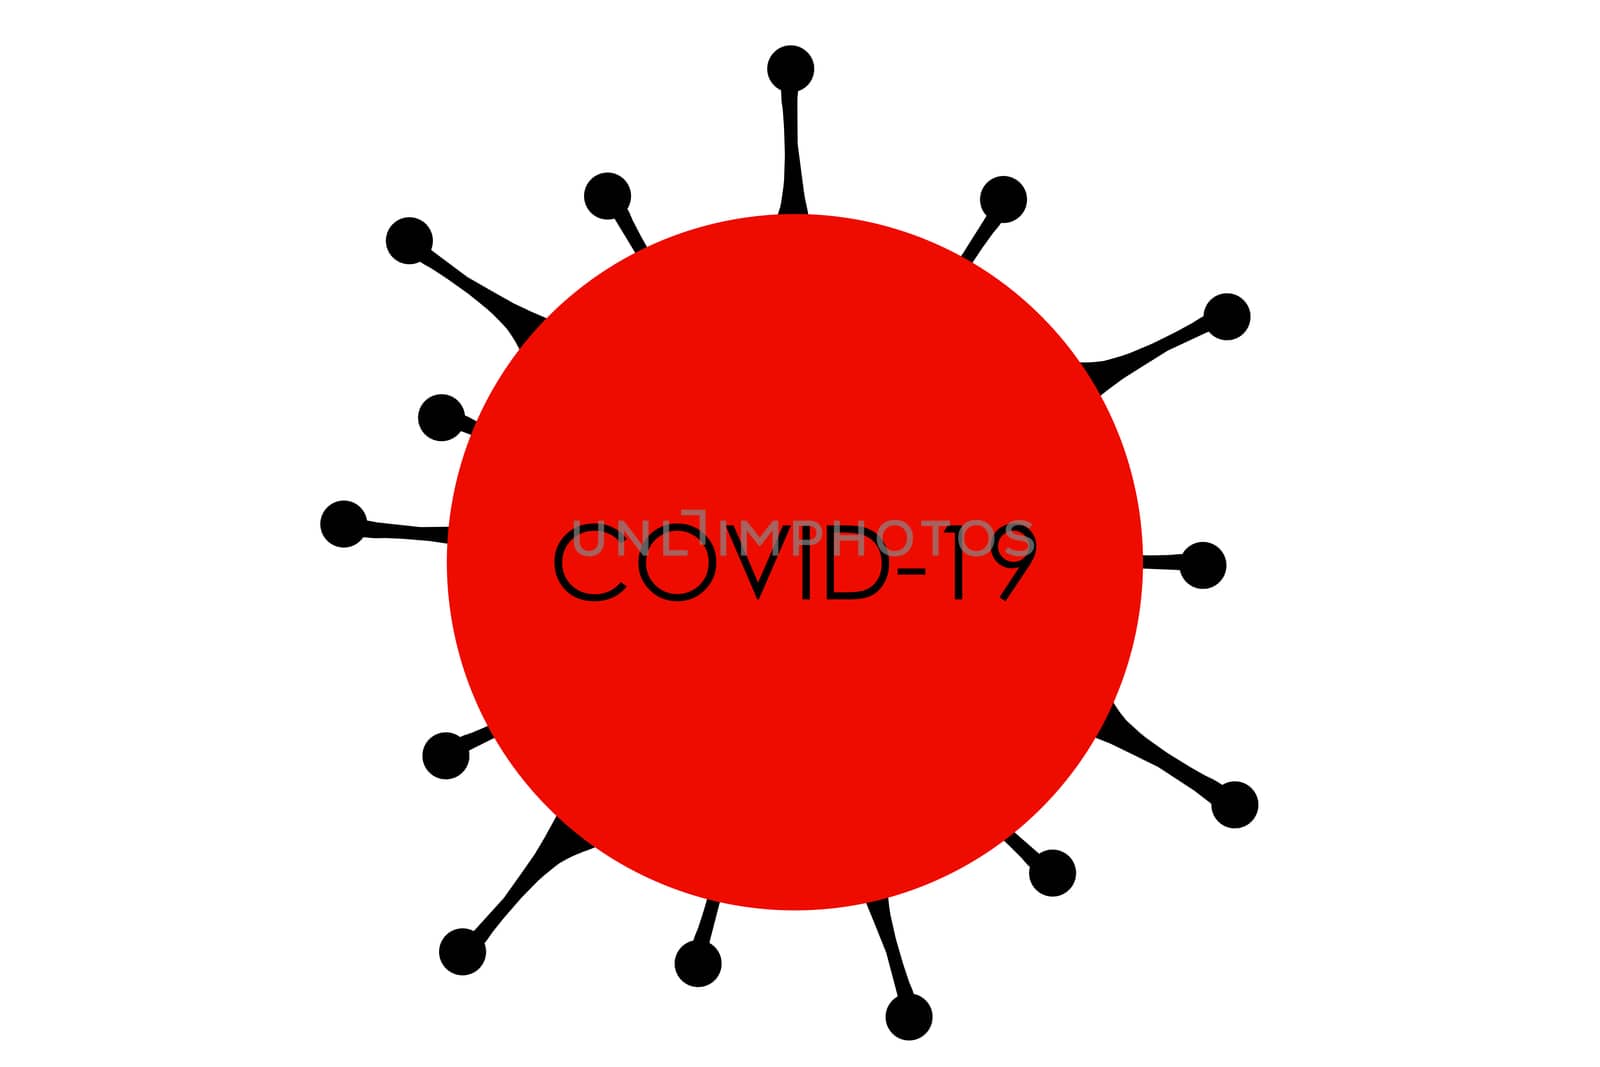 COVID-19 Coronavirus graphic design of corona virus model illustration on white background with text title in center of red sphere by Maridav